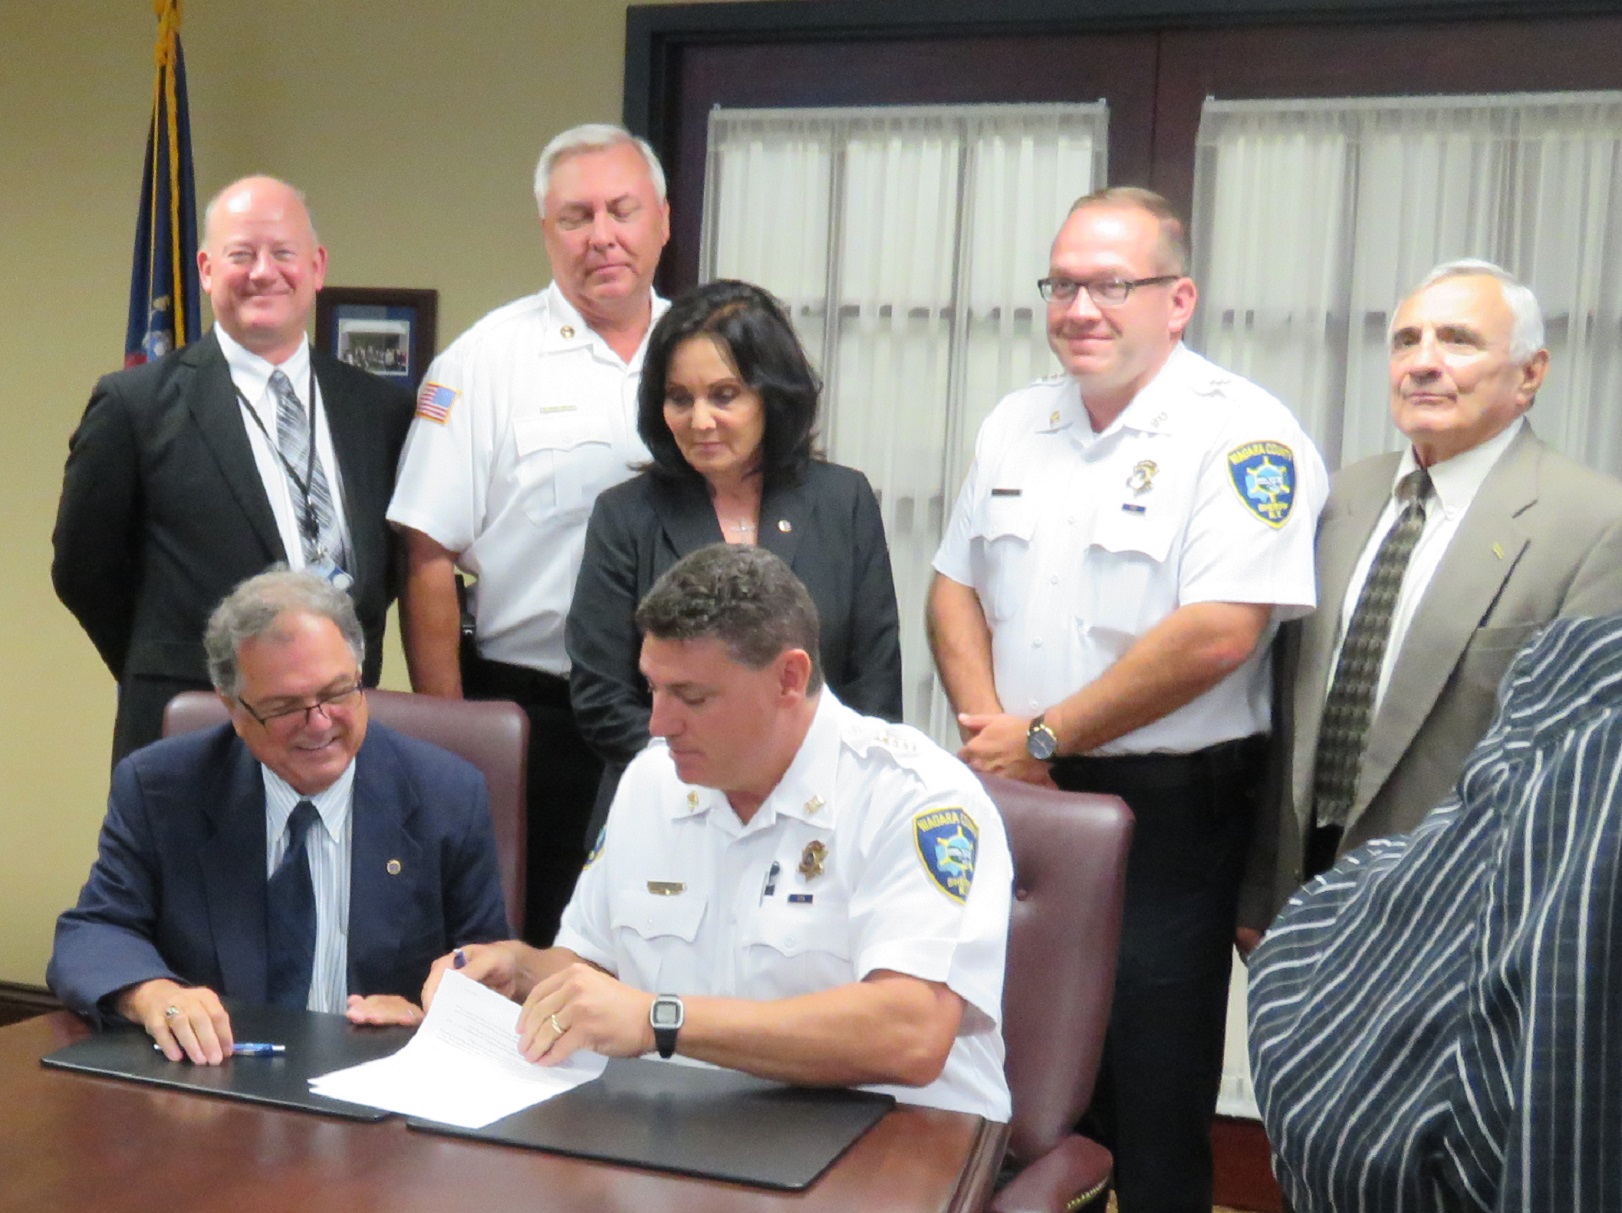 NCCC Interim President William Murabito (left, seated) and Niagara County Sheriff James Voutour (right, seated) sign a memorandum to provide an officer on campus. Also pictured, from left,  Michael Dombrowski, NCCC vice president for operations; Ross Annable, chief of Campus Public Safety; Gina I. Virtuoso, NCCC Board of Trustees vice chairperson; Michael J. Filicetti, undersheriff; and William L. Ross, NCCC Board of Trustees chairperson.